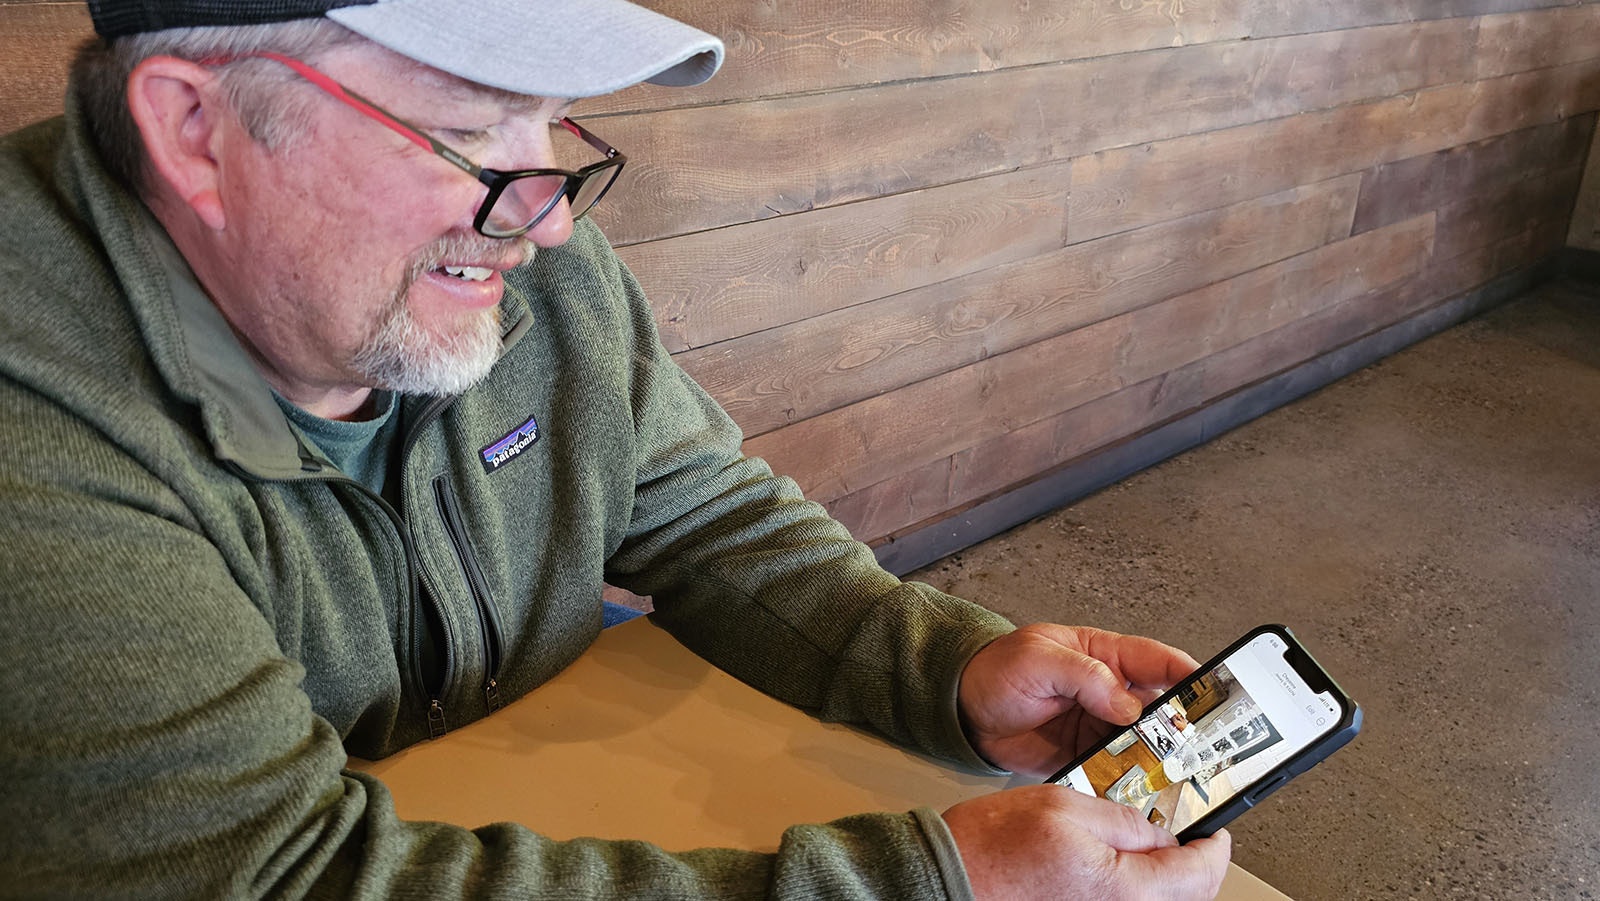 Beer Judge Paul Dey looks through photos on his phone of past beers he's consumed or judged.